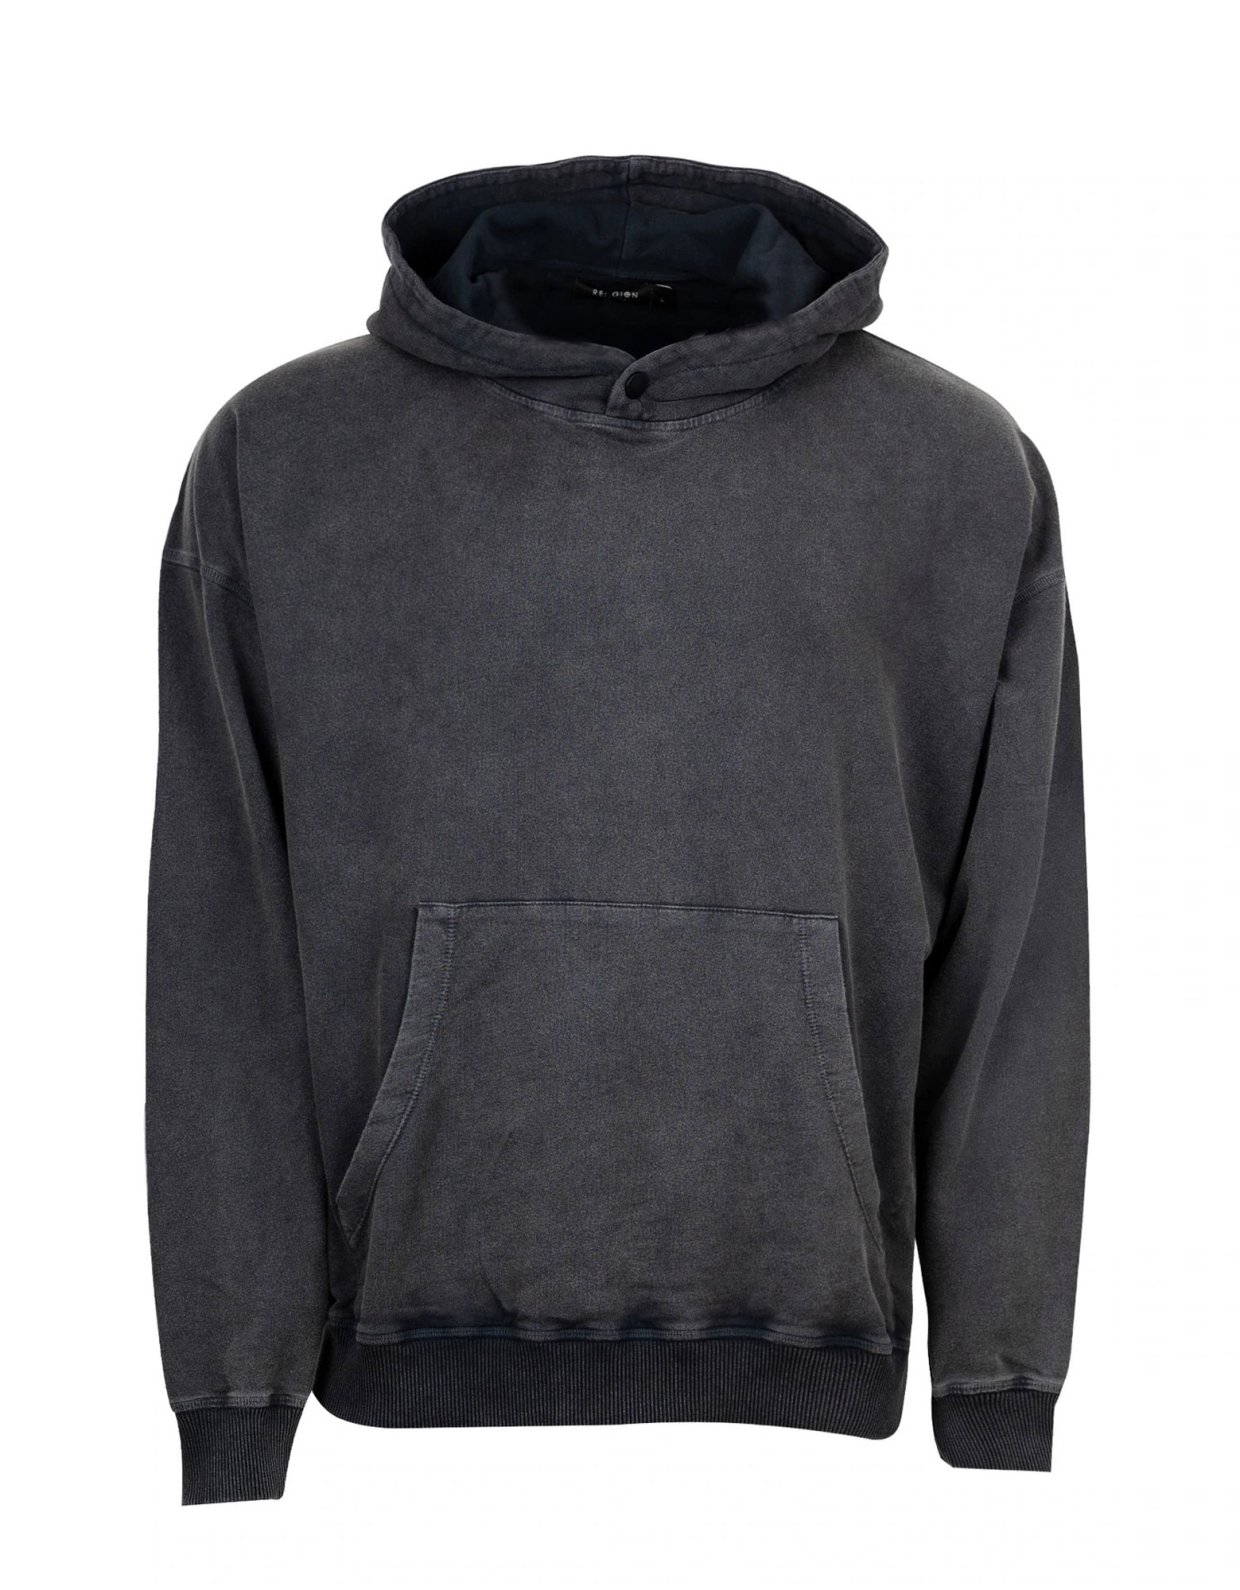 Religion Irridescent hoody washed charcoal